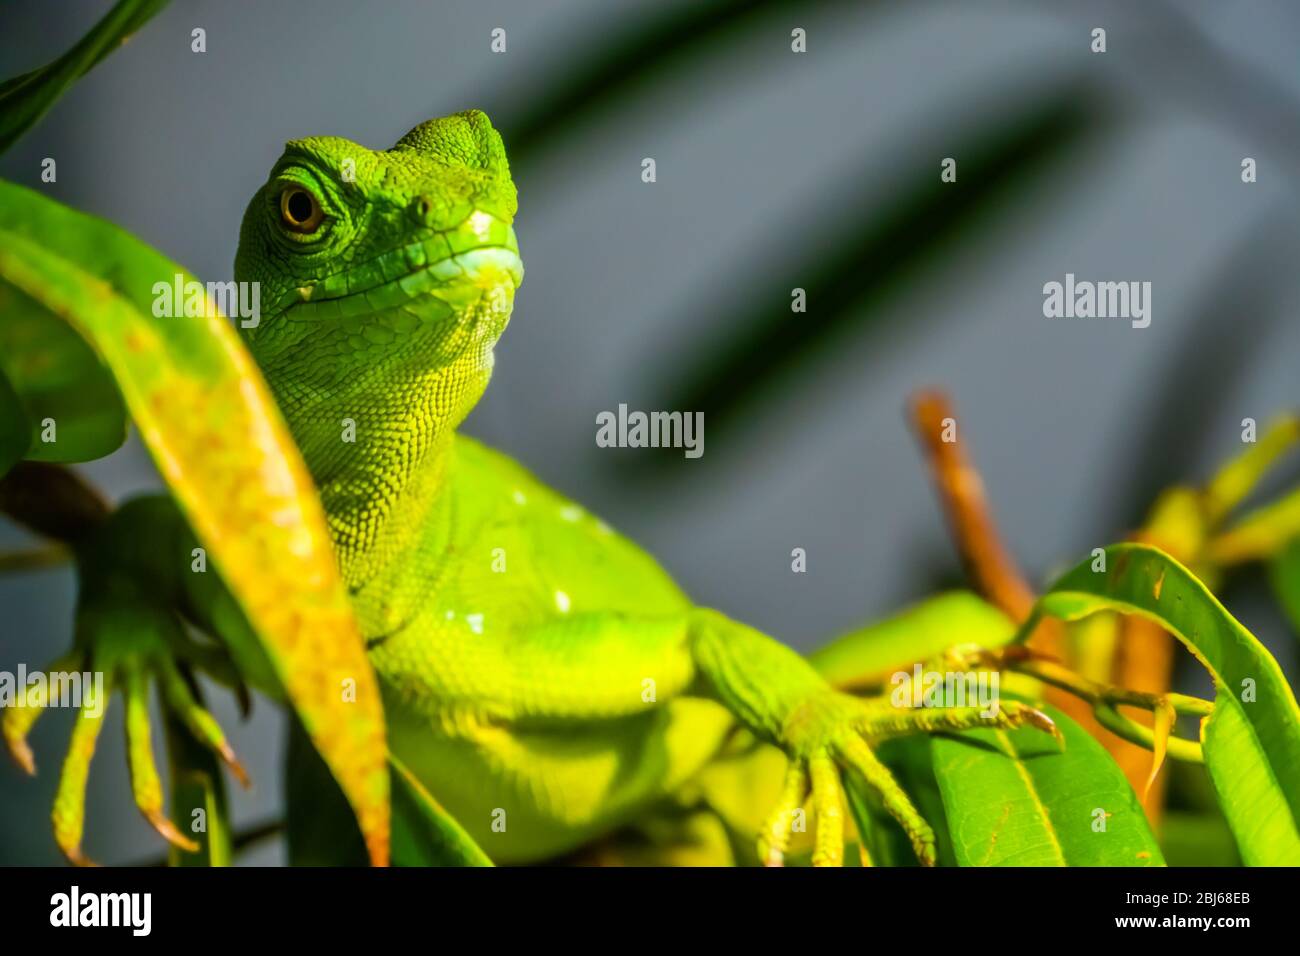 closeup portrait of a green plumed basilisk, tropical reptile specie from America Stock Photo